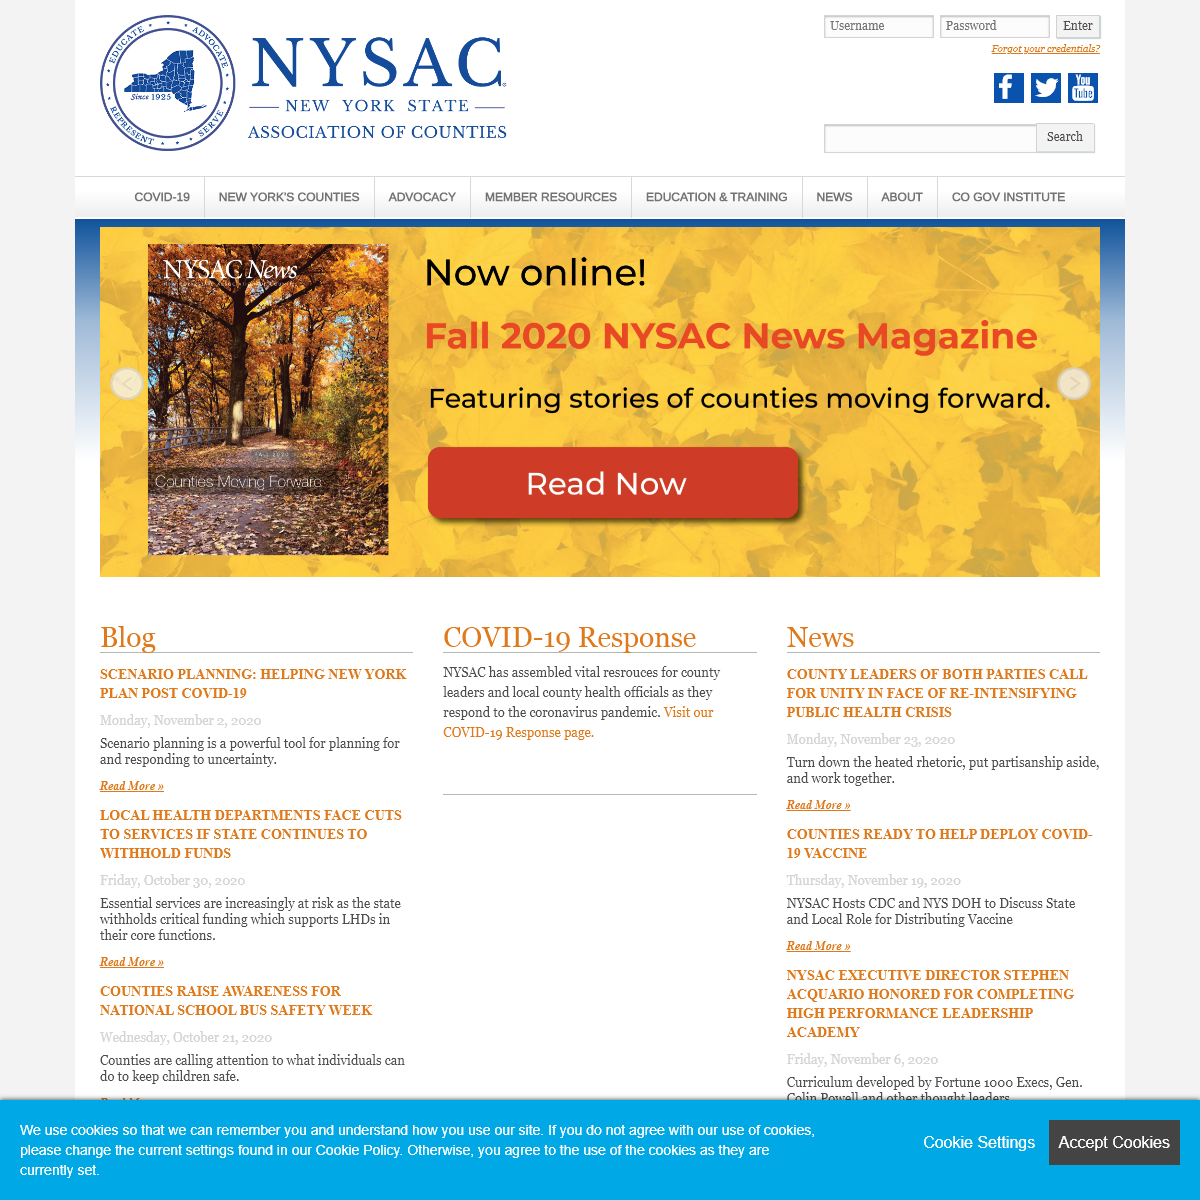 A complete backup of nysac.org